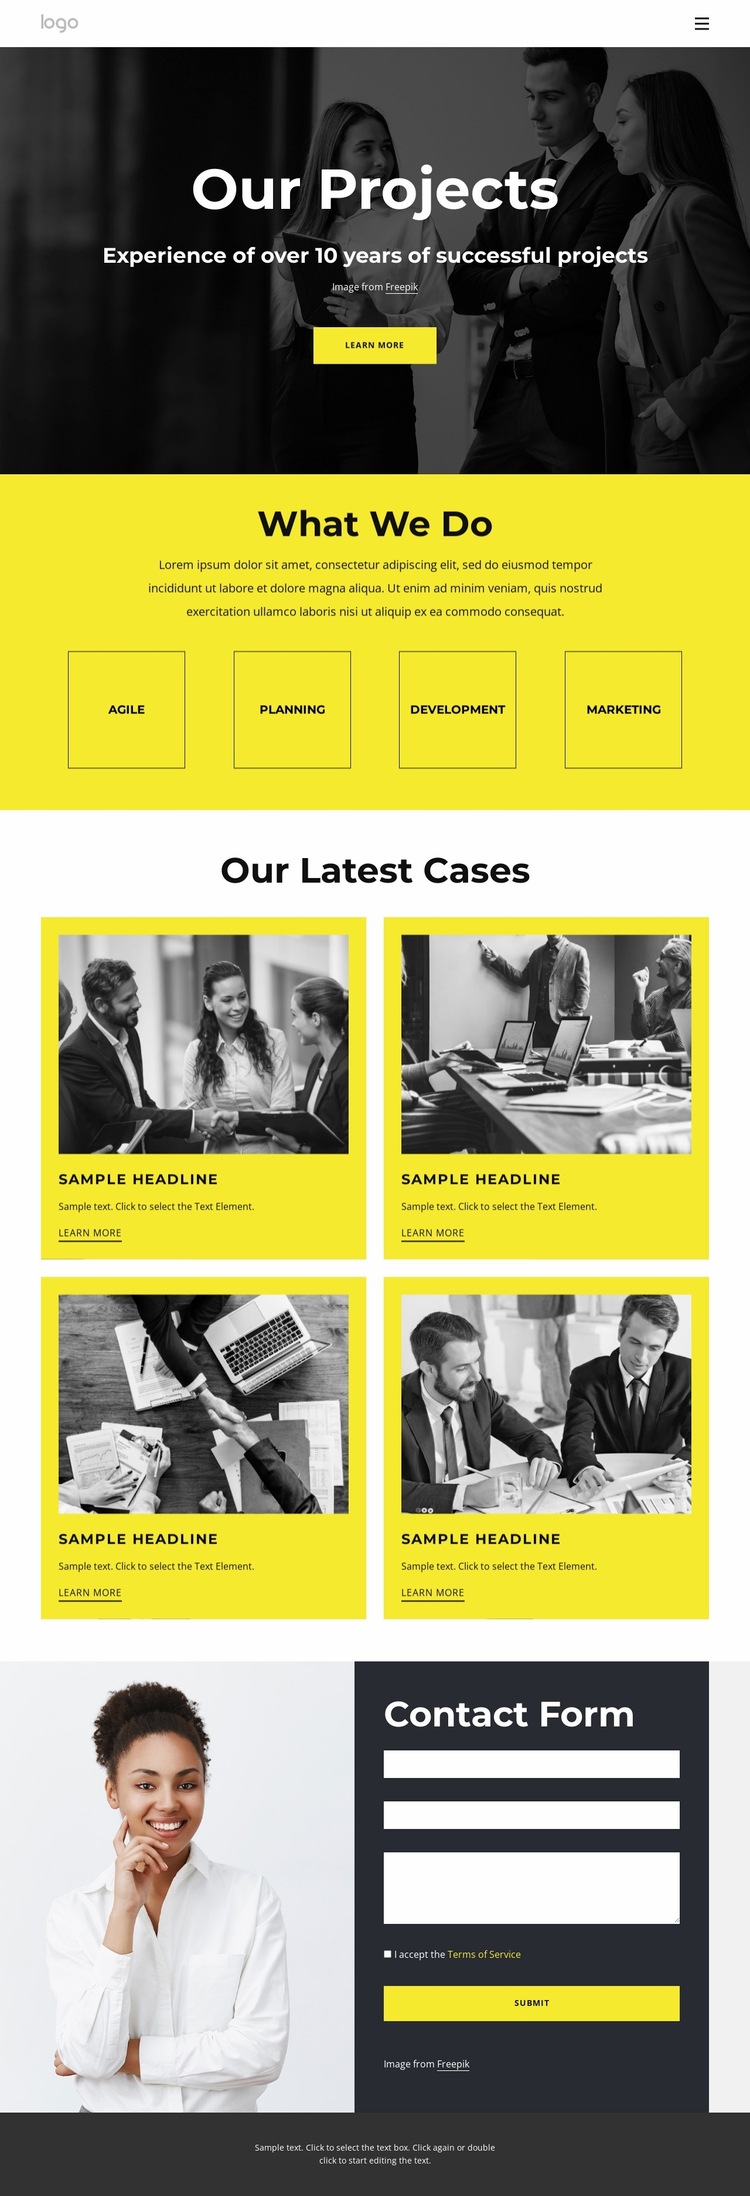 Our consulting success stories Website Builder Templates